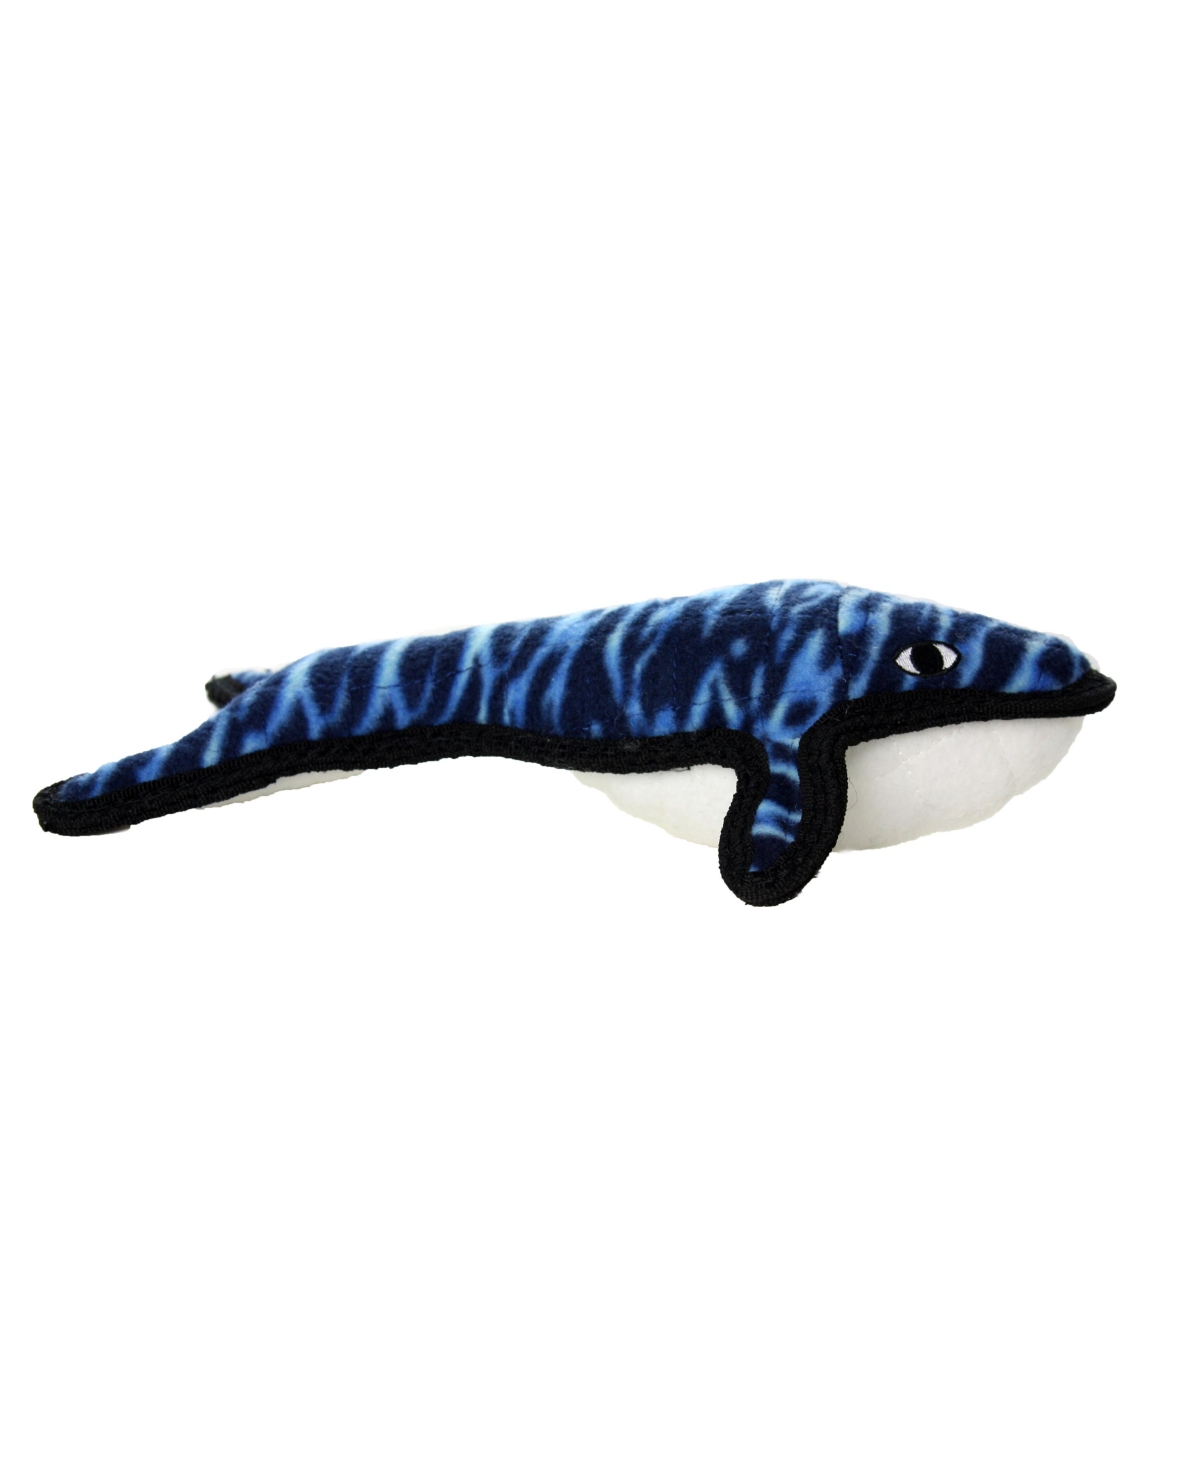 Ocean Creature Whale, Dog Toy - Blue